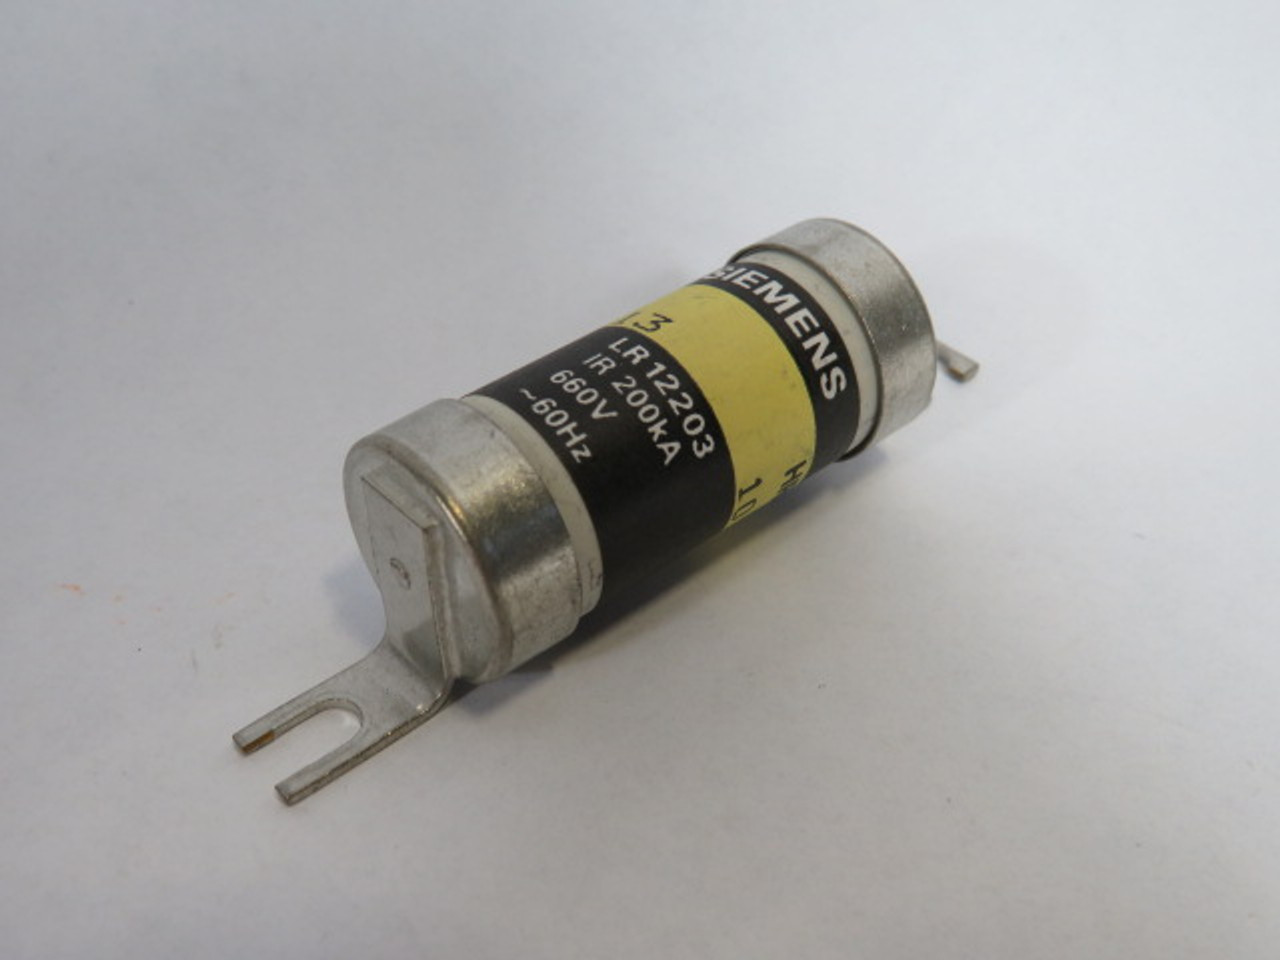 Siemens 3NW2113 Bolt on Fuse 10A 600V USED